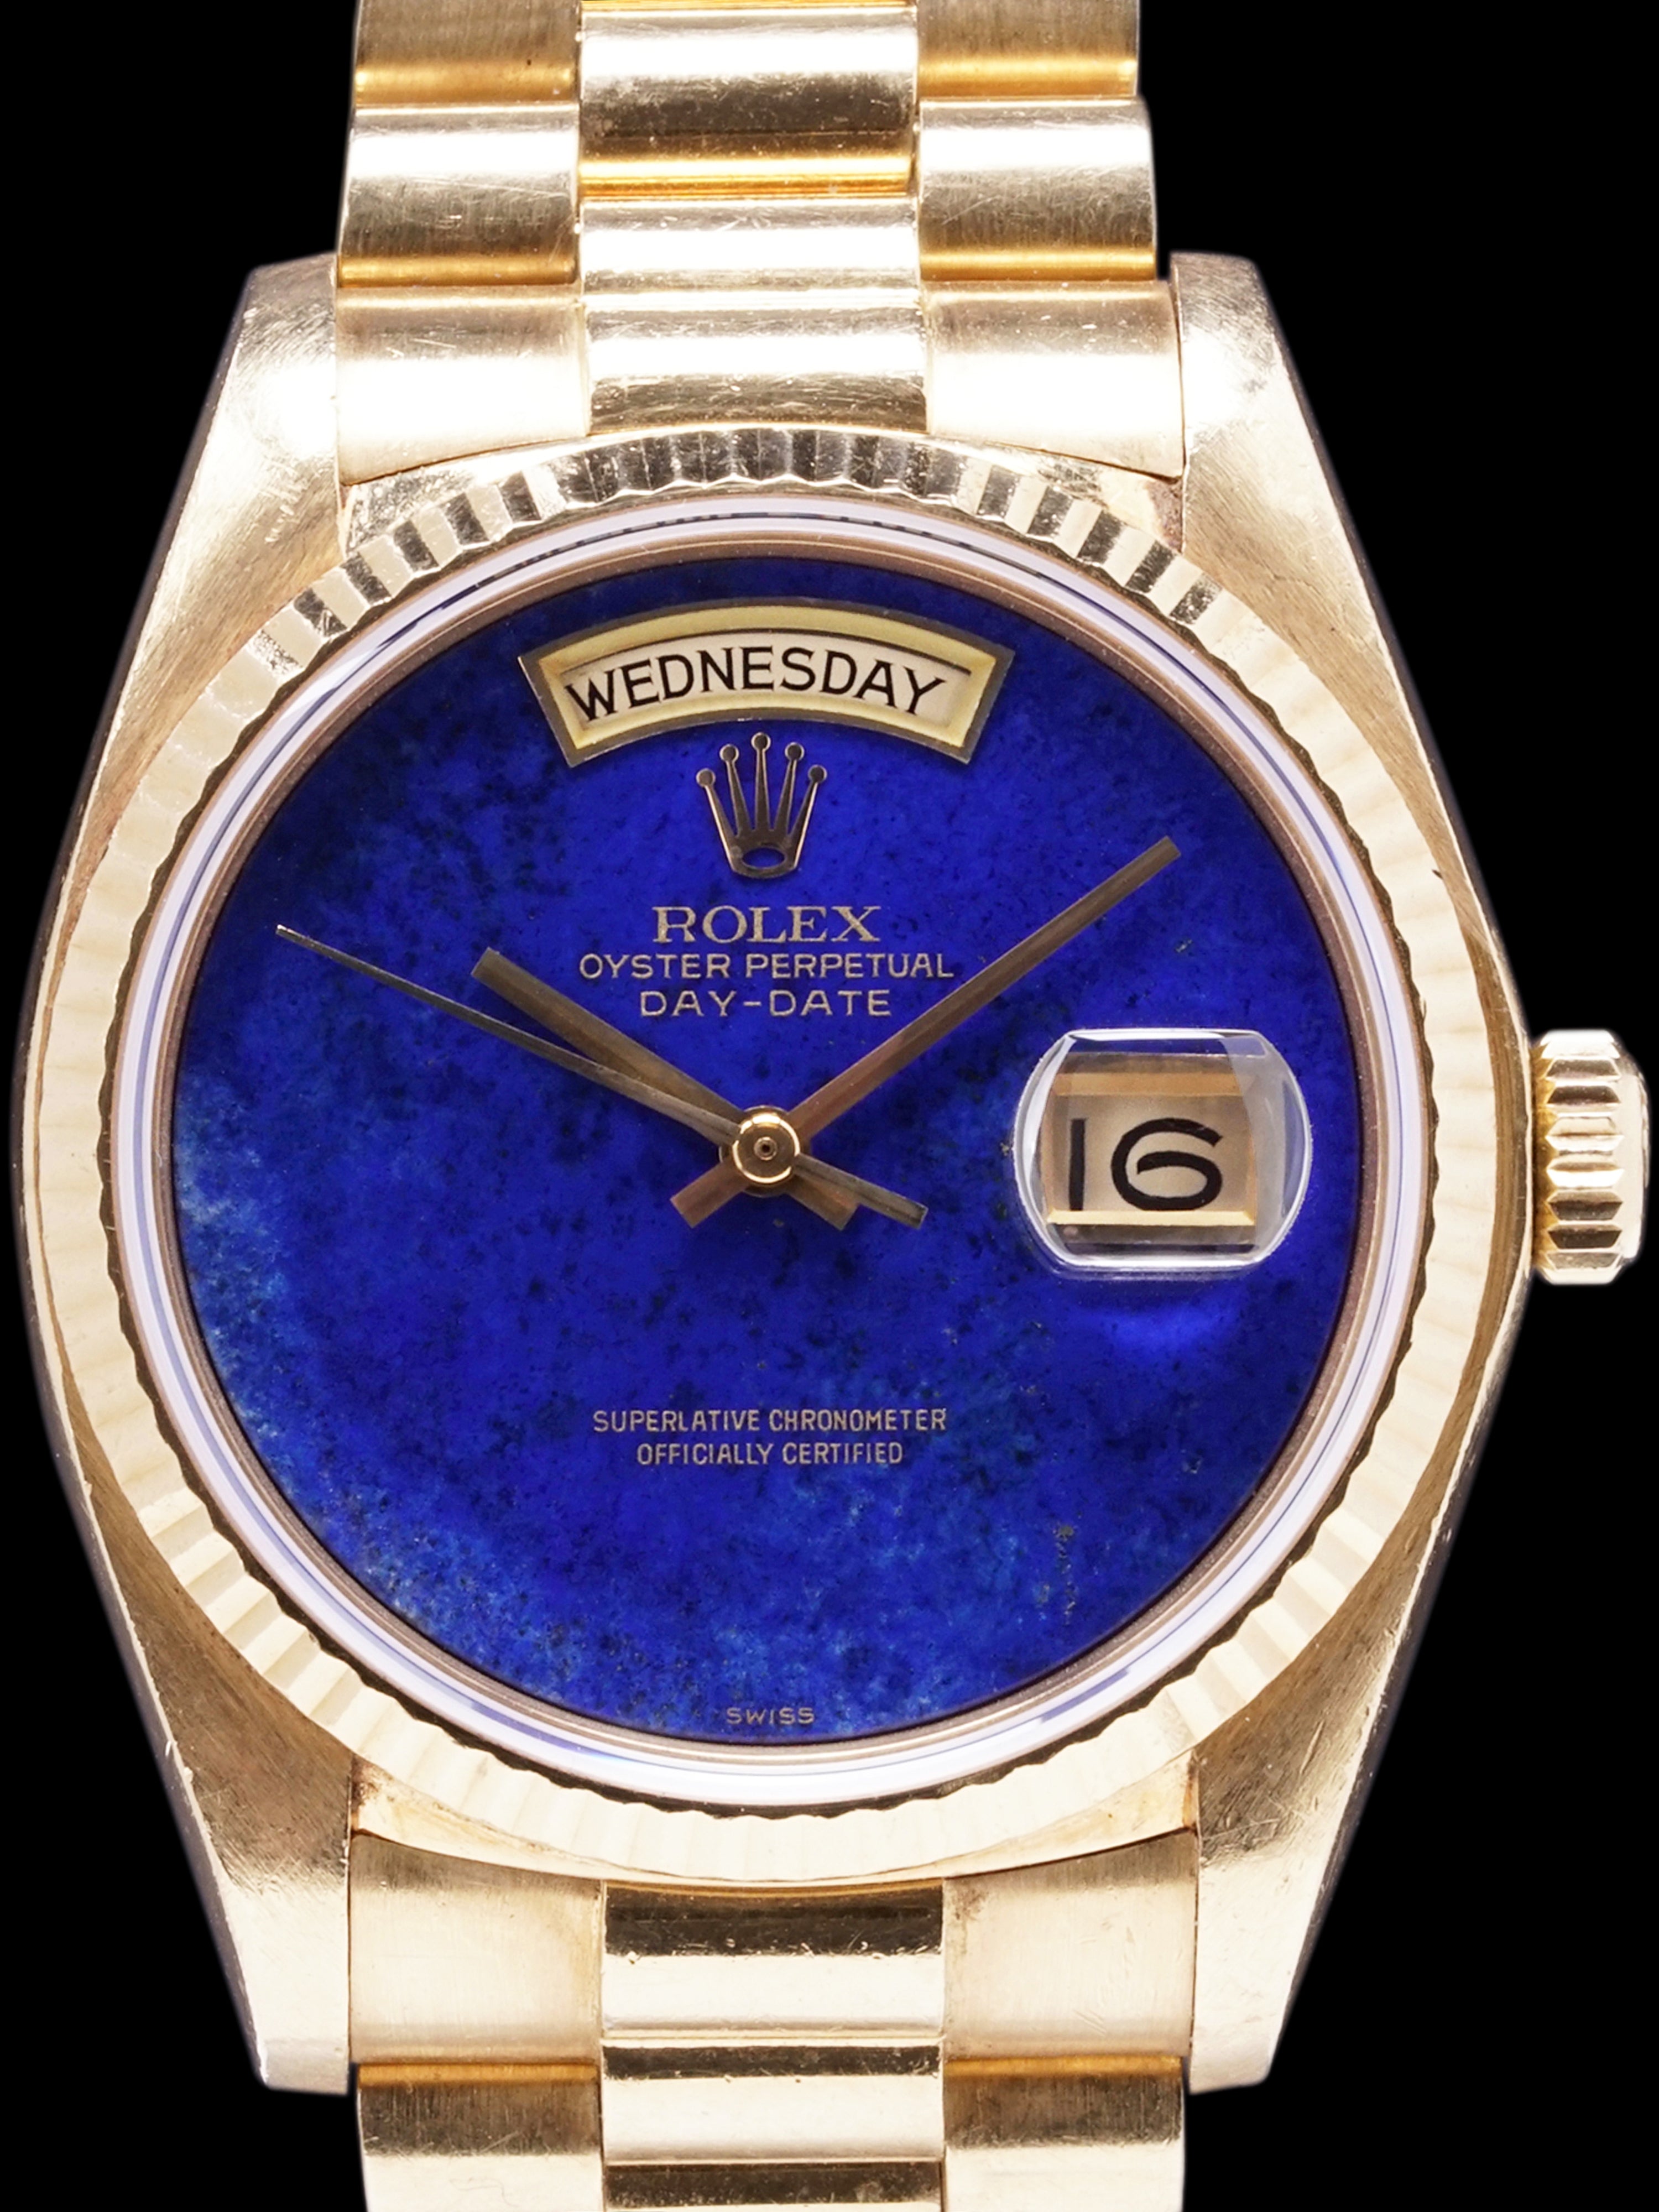 *Unpolished* 1979 Rolex Day-Date (Ref. 18038) 18k YG Lapis Dial